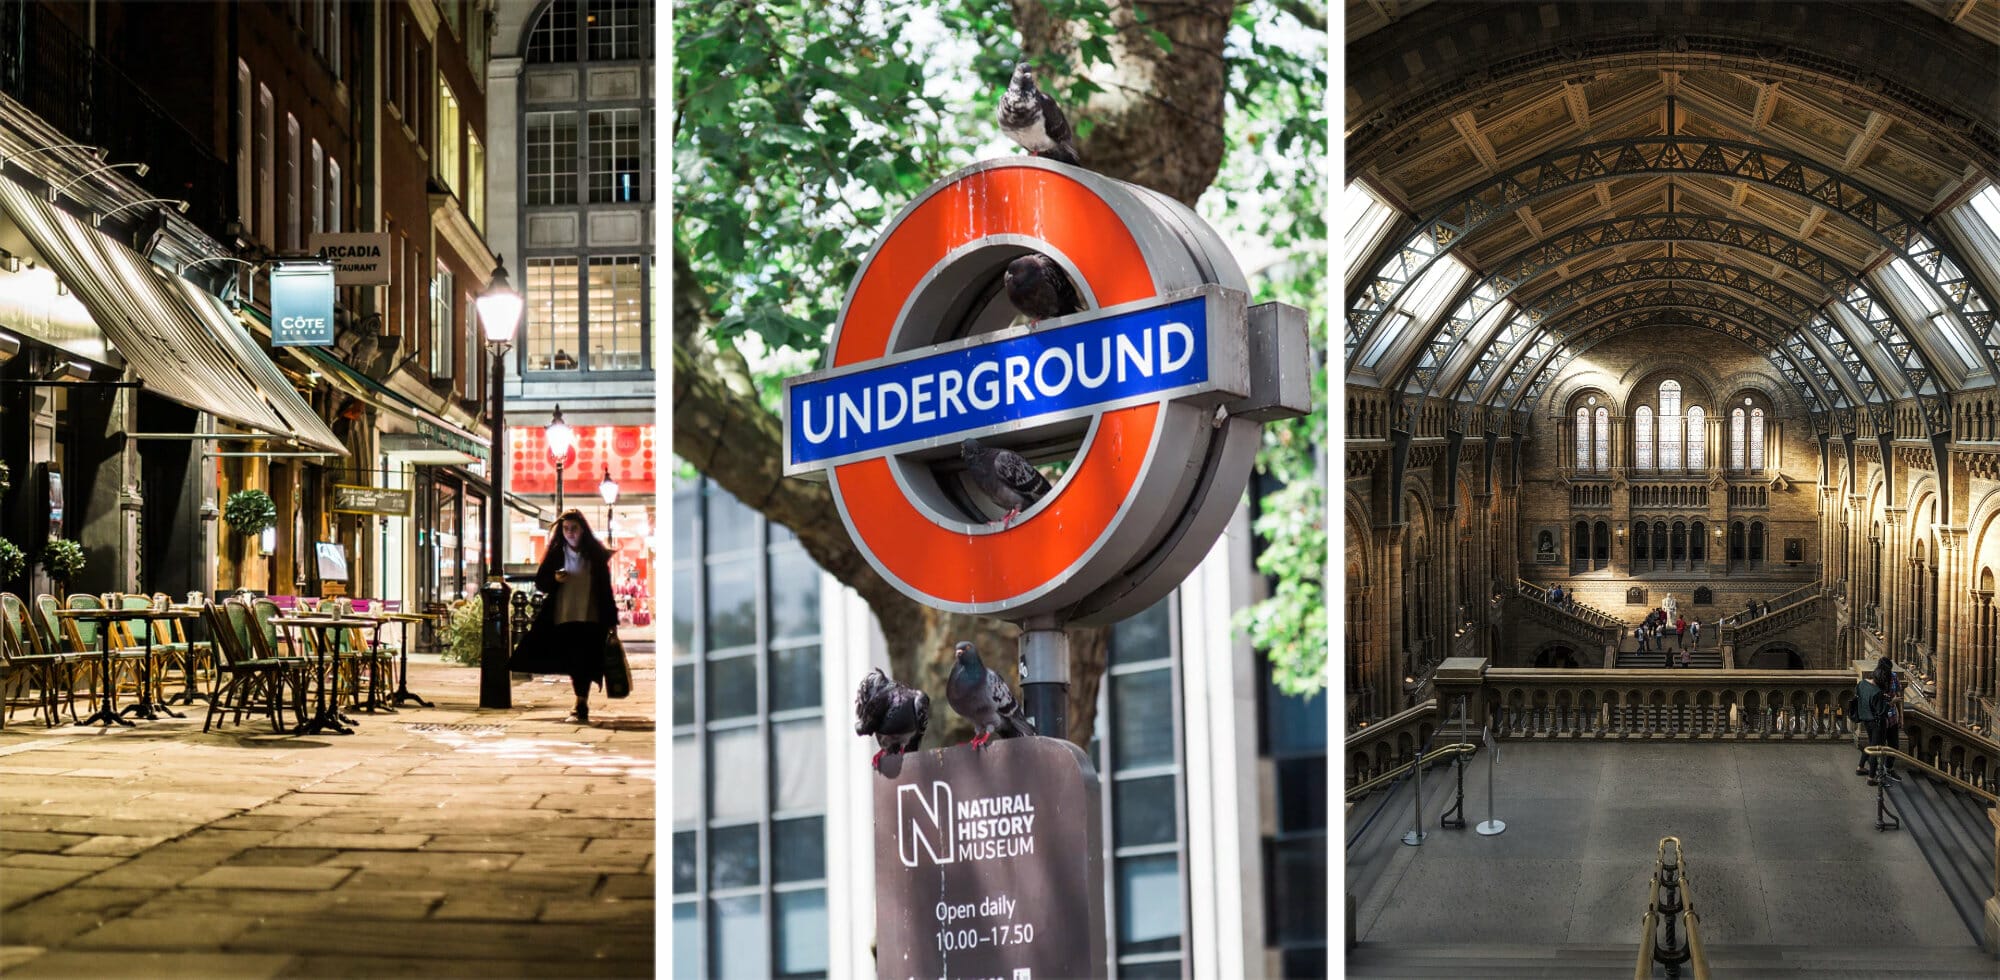 Best Things to do in Sloane Square: An Insider's Area Guide